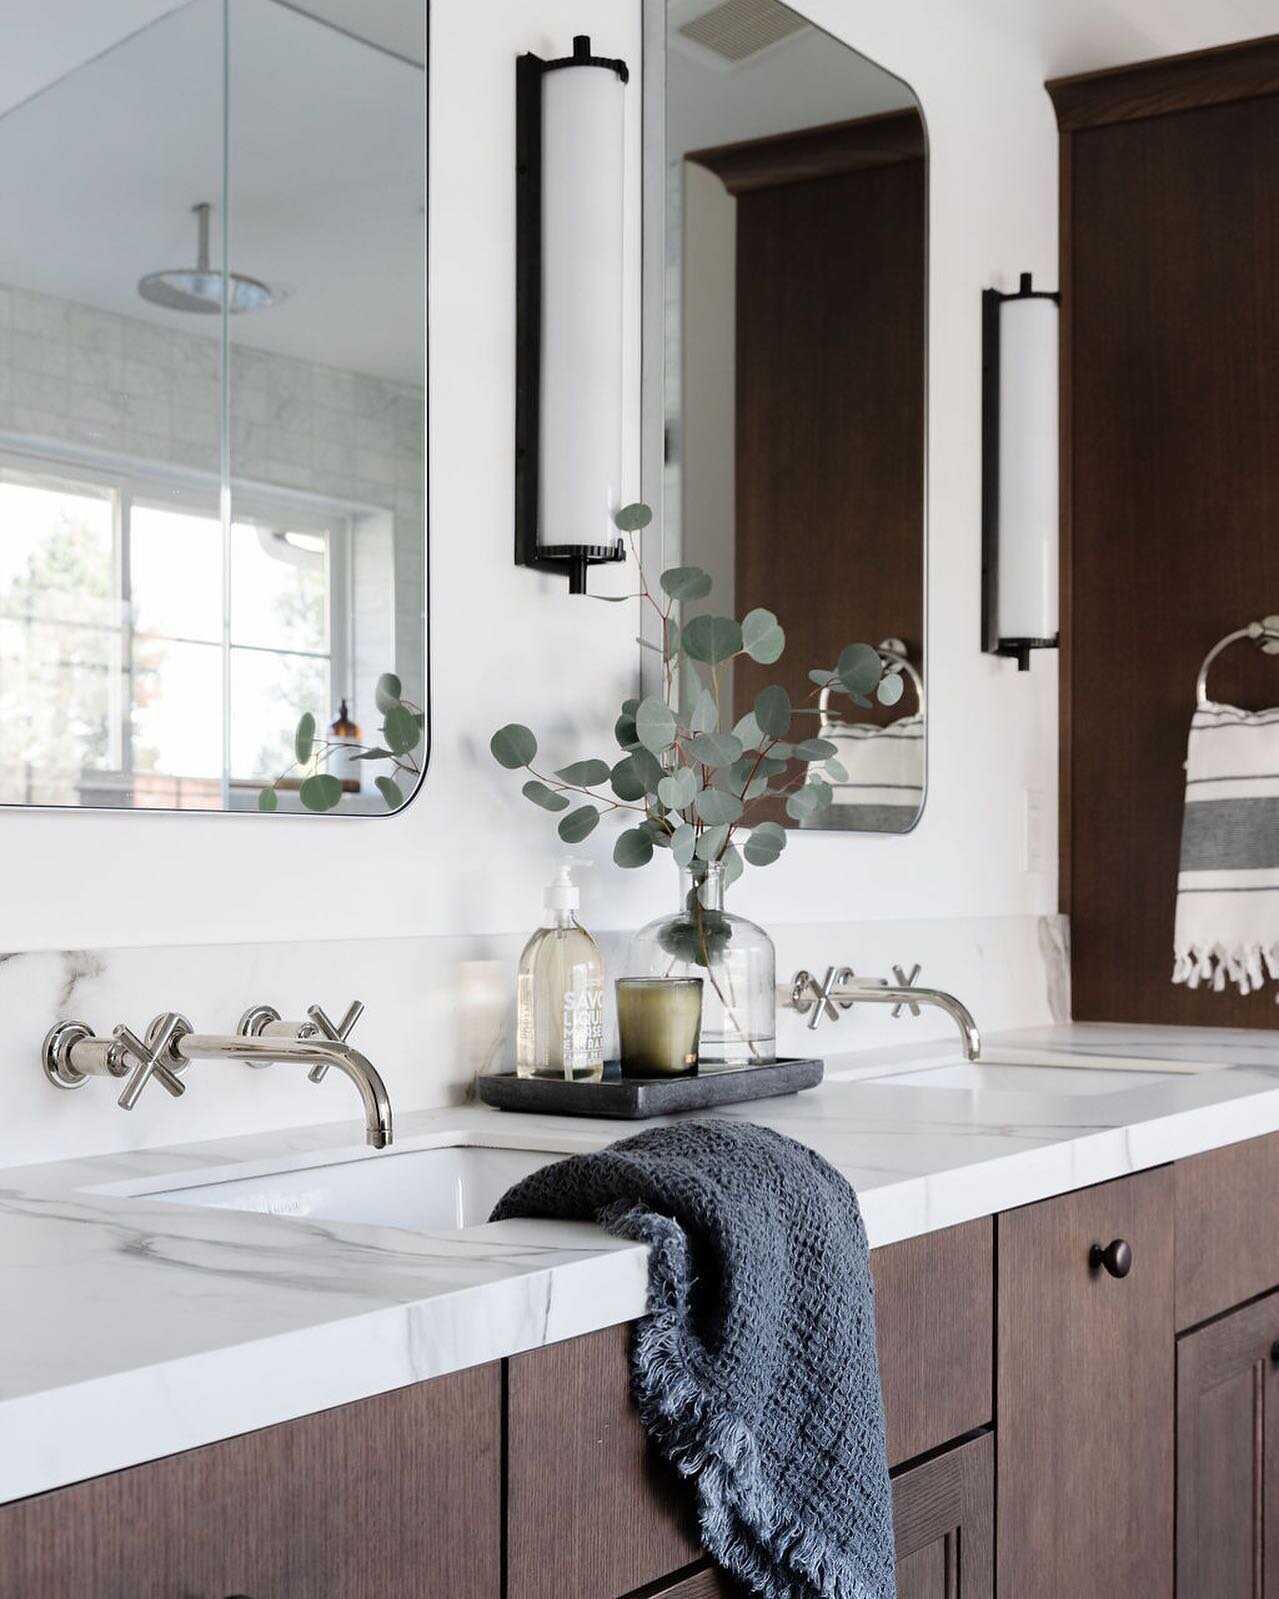 A fresh view of our Lockhaven bathroom remodel &mdash; using a wall-mounted faucet adds a streamlined design element and they&rsquo;re also easier to clean! 📸: @emilykennedyphoto